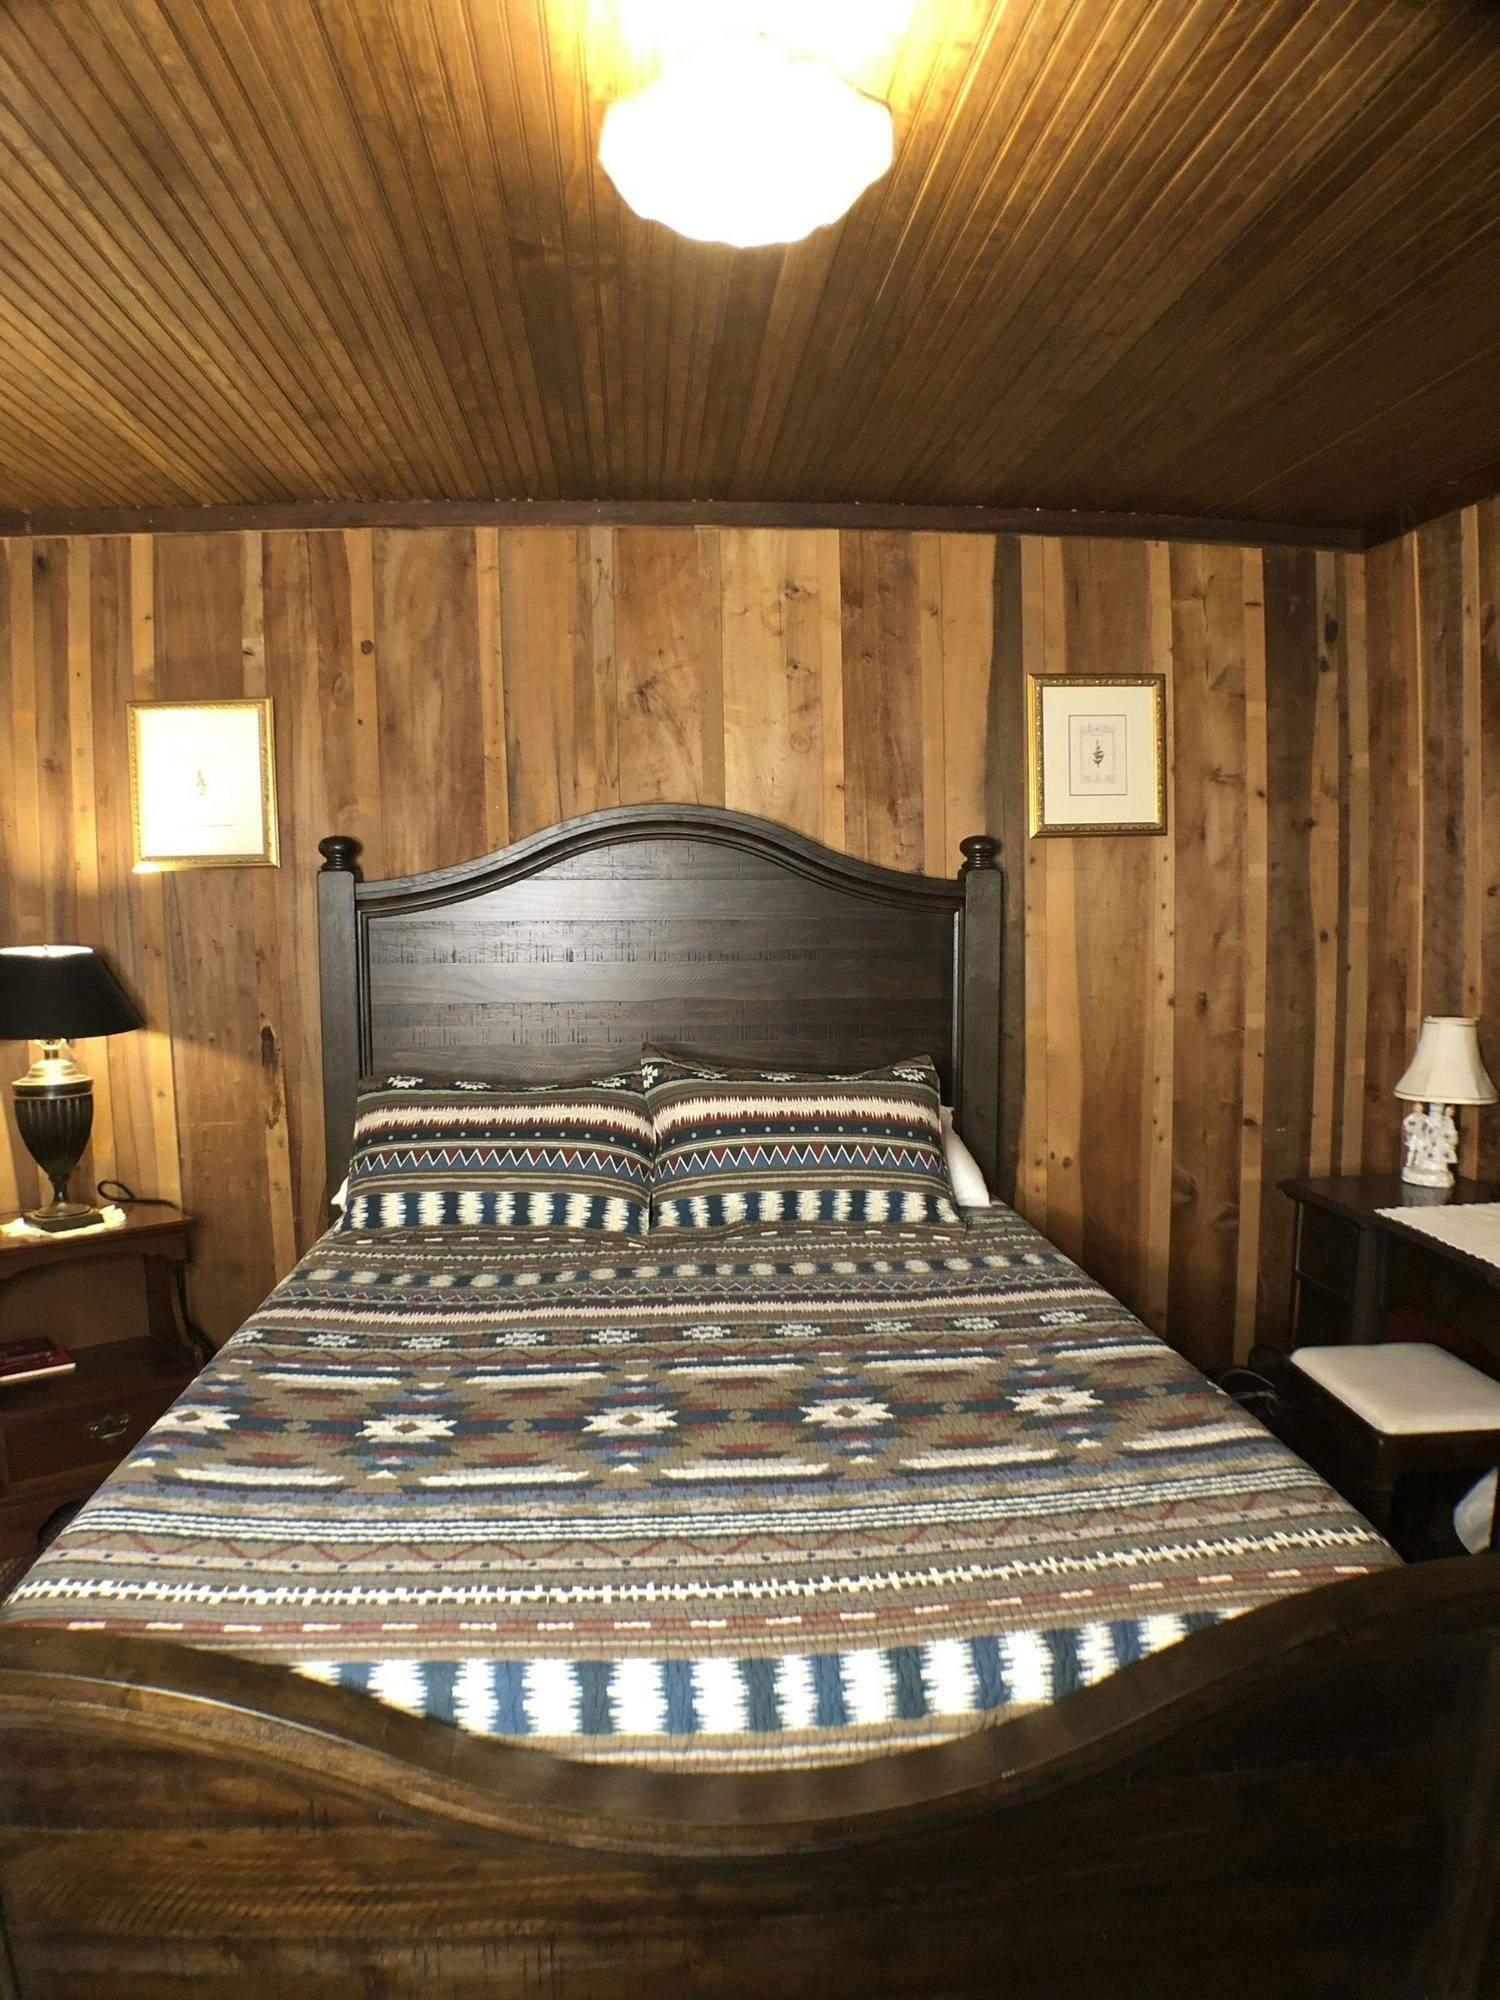 Rustic bedroom with a dark wooden bed frame, patterned bedspread, and wooden walls.